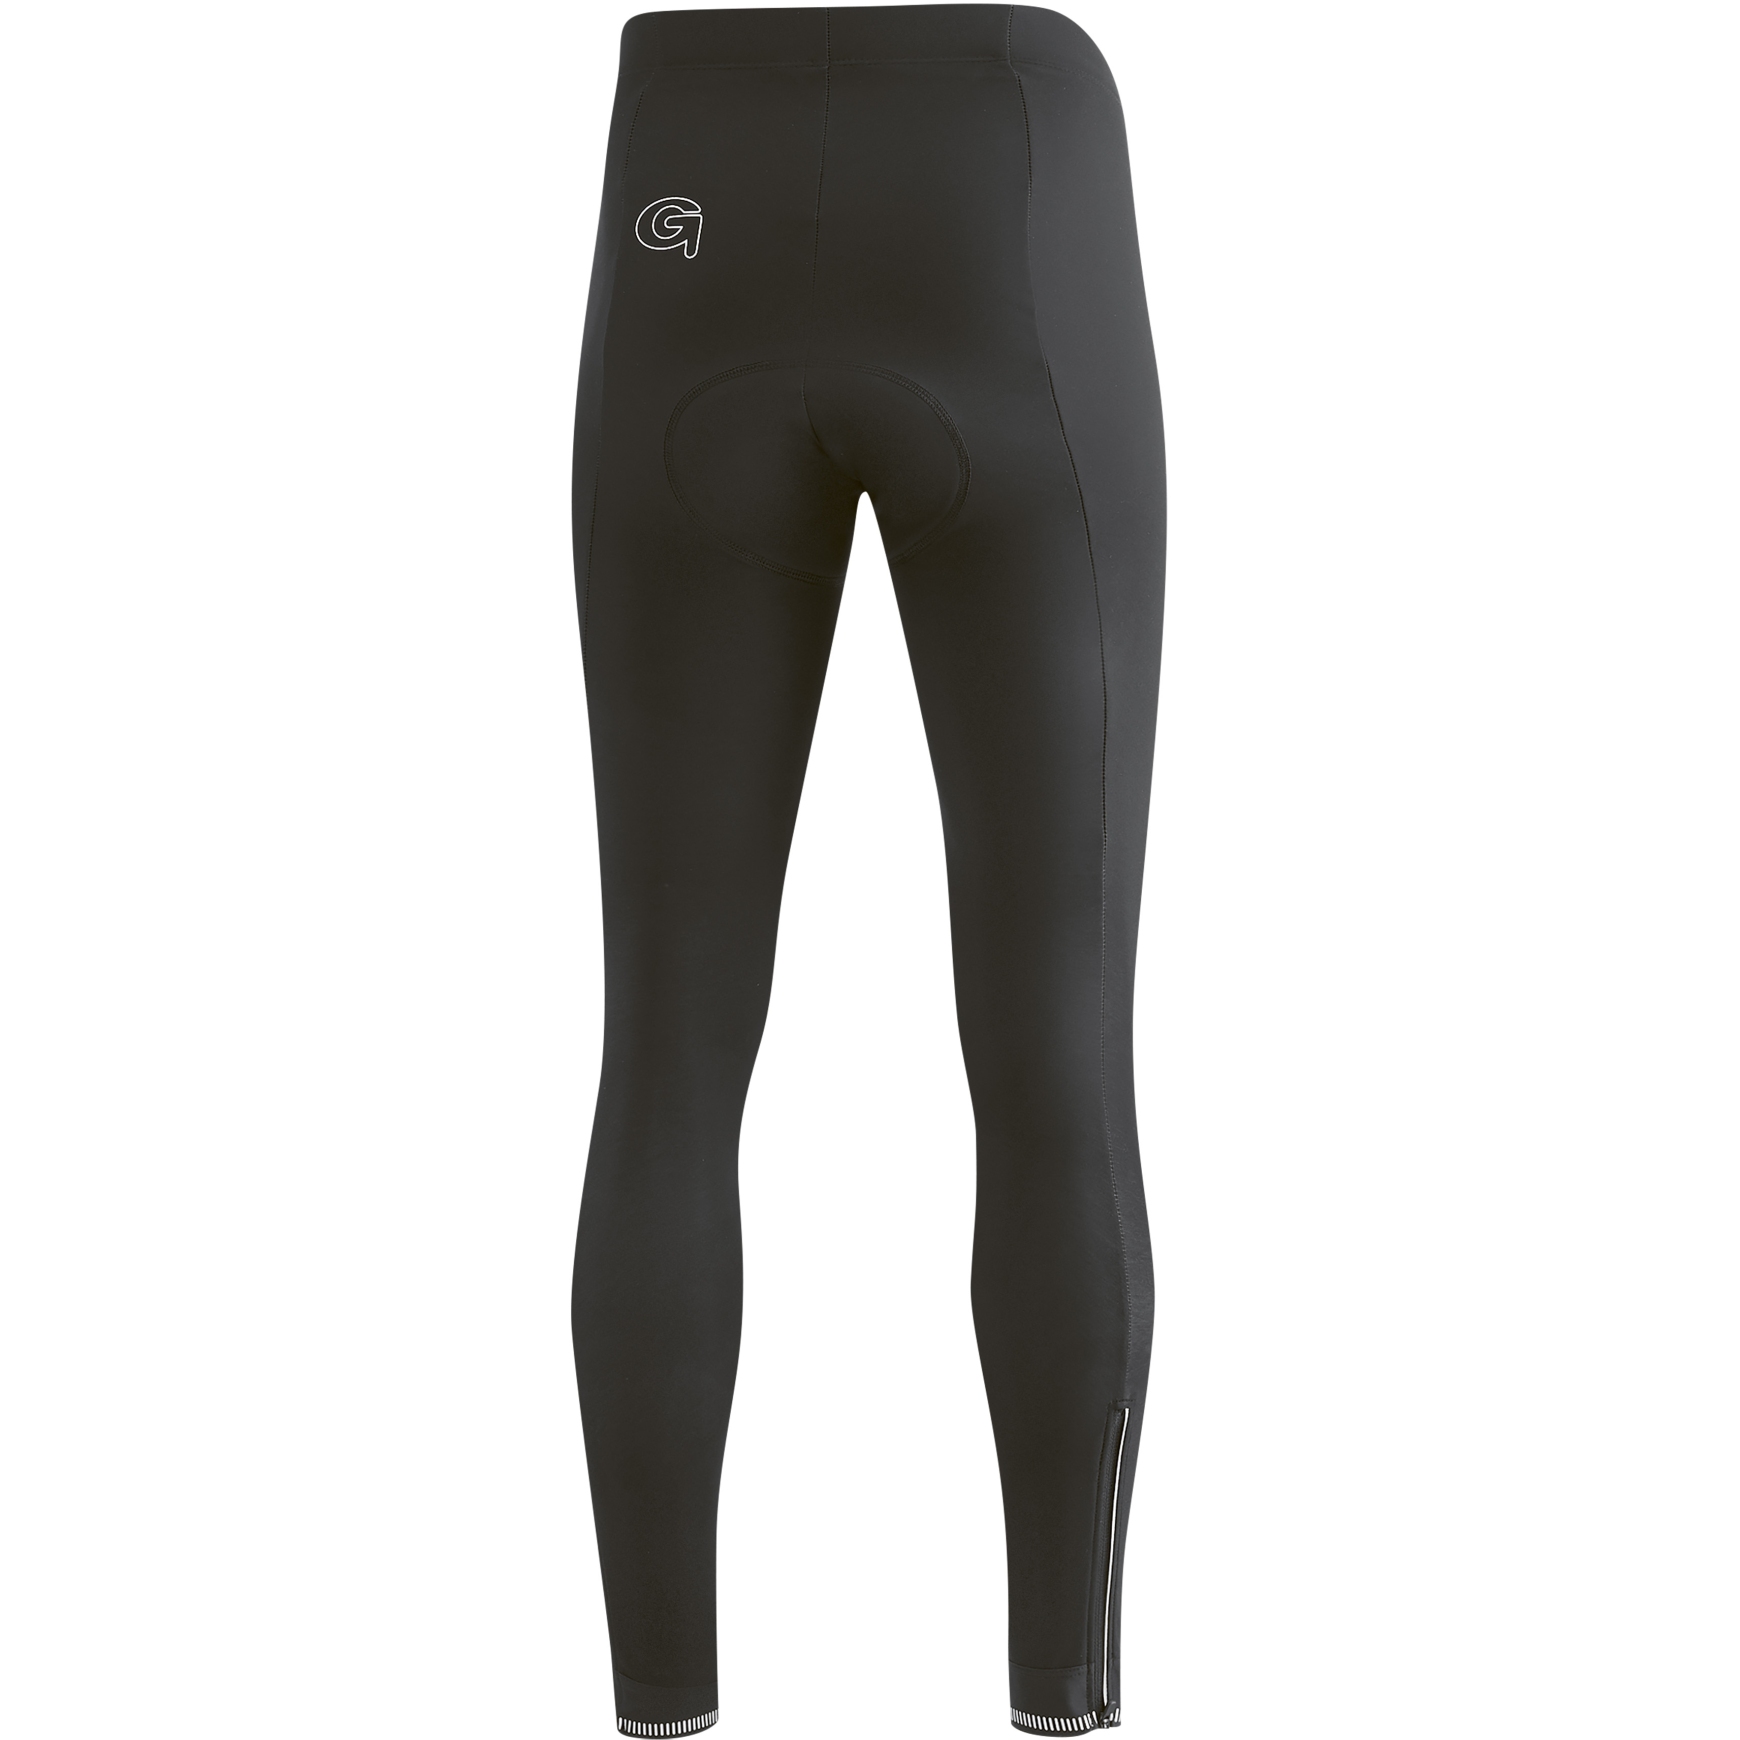 Gonso SITIVO Red Thermal Bike Tights Men - Black